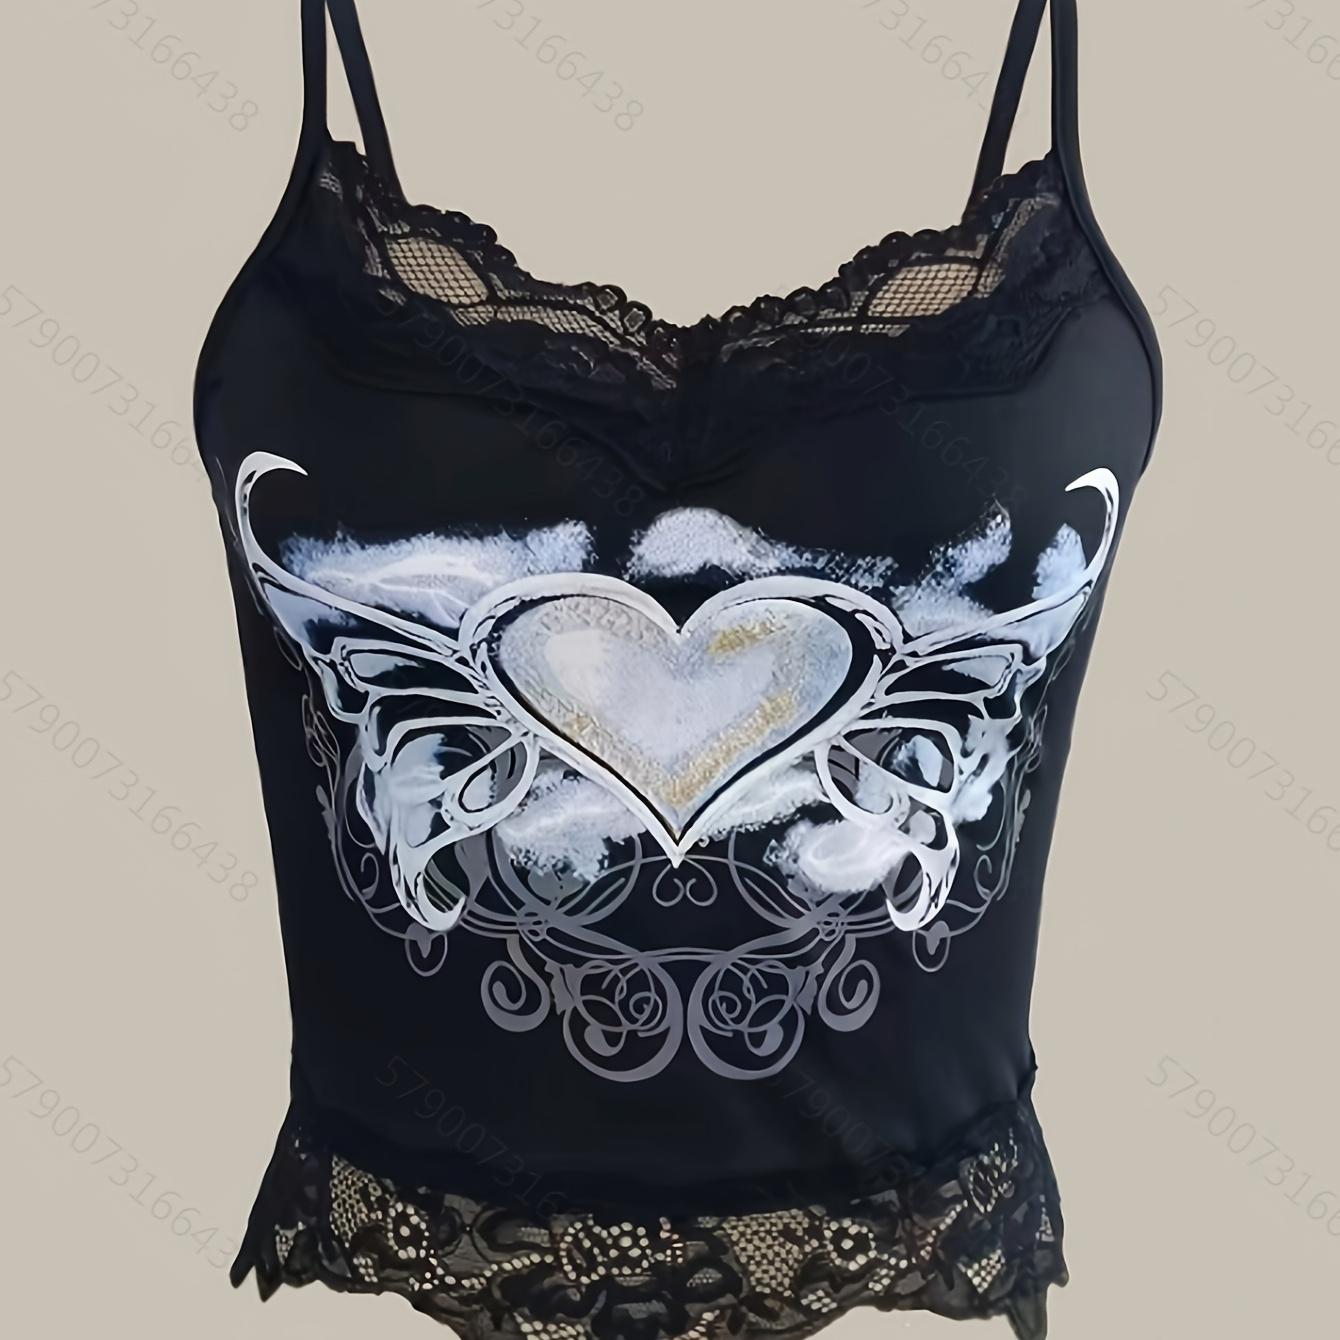 

Y2k Heart Print Cami Top, Contrast Lace Slim Sleeveless Tops, Women's Clothing For Grunge Style